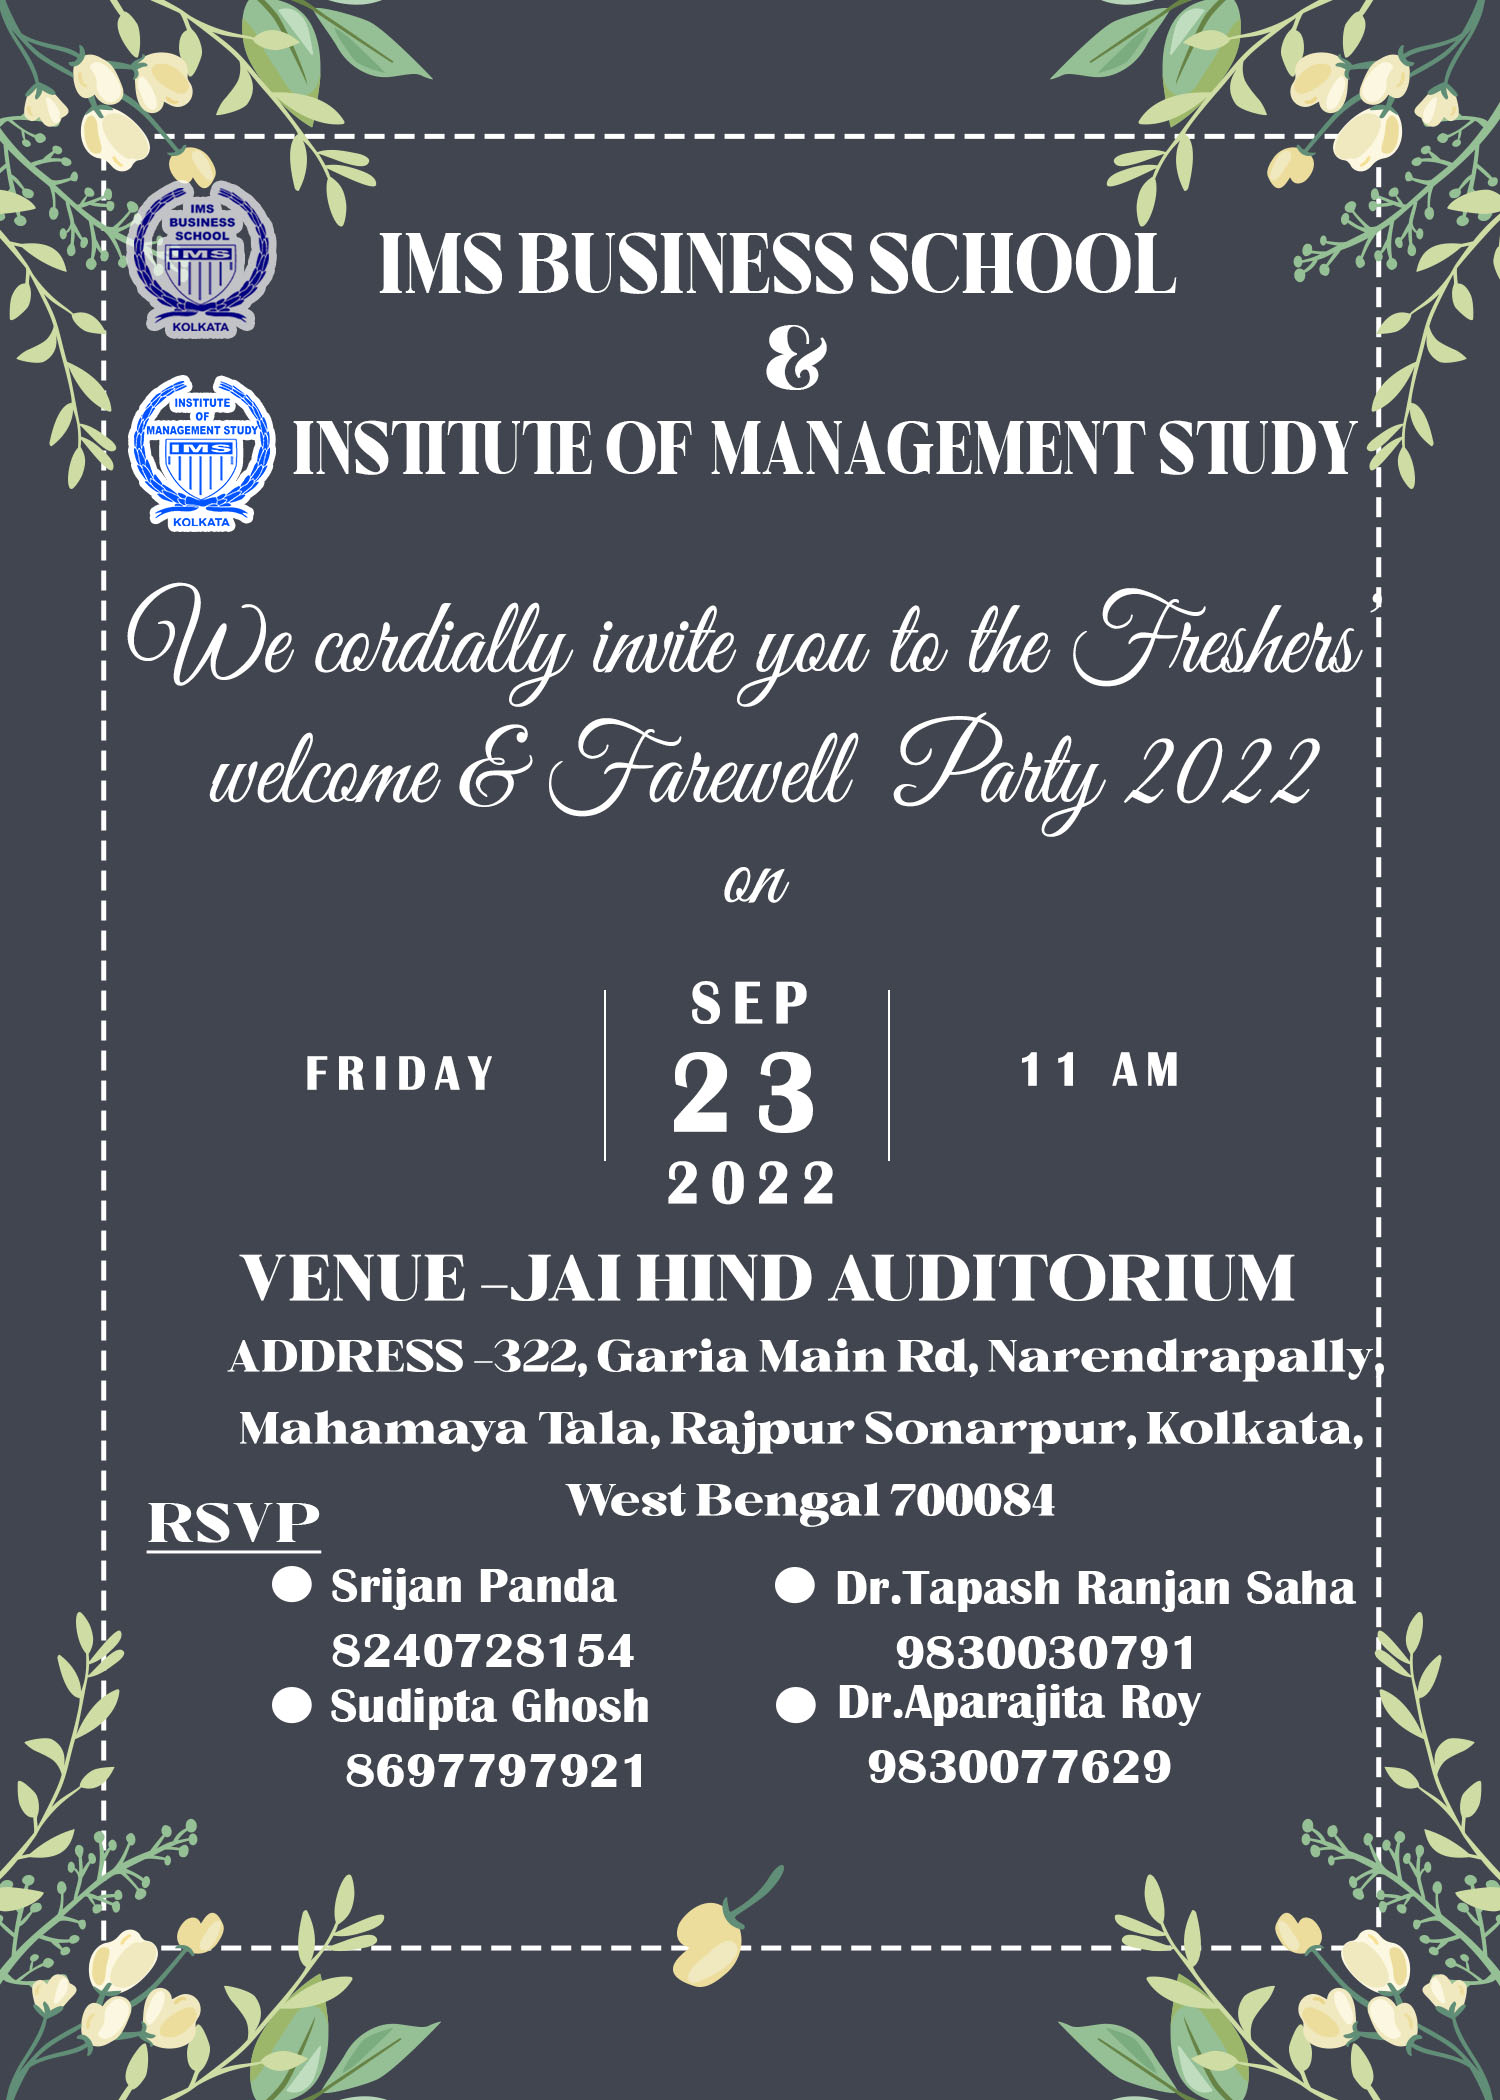 invite you to the Fresher’s & Farewell